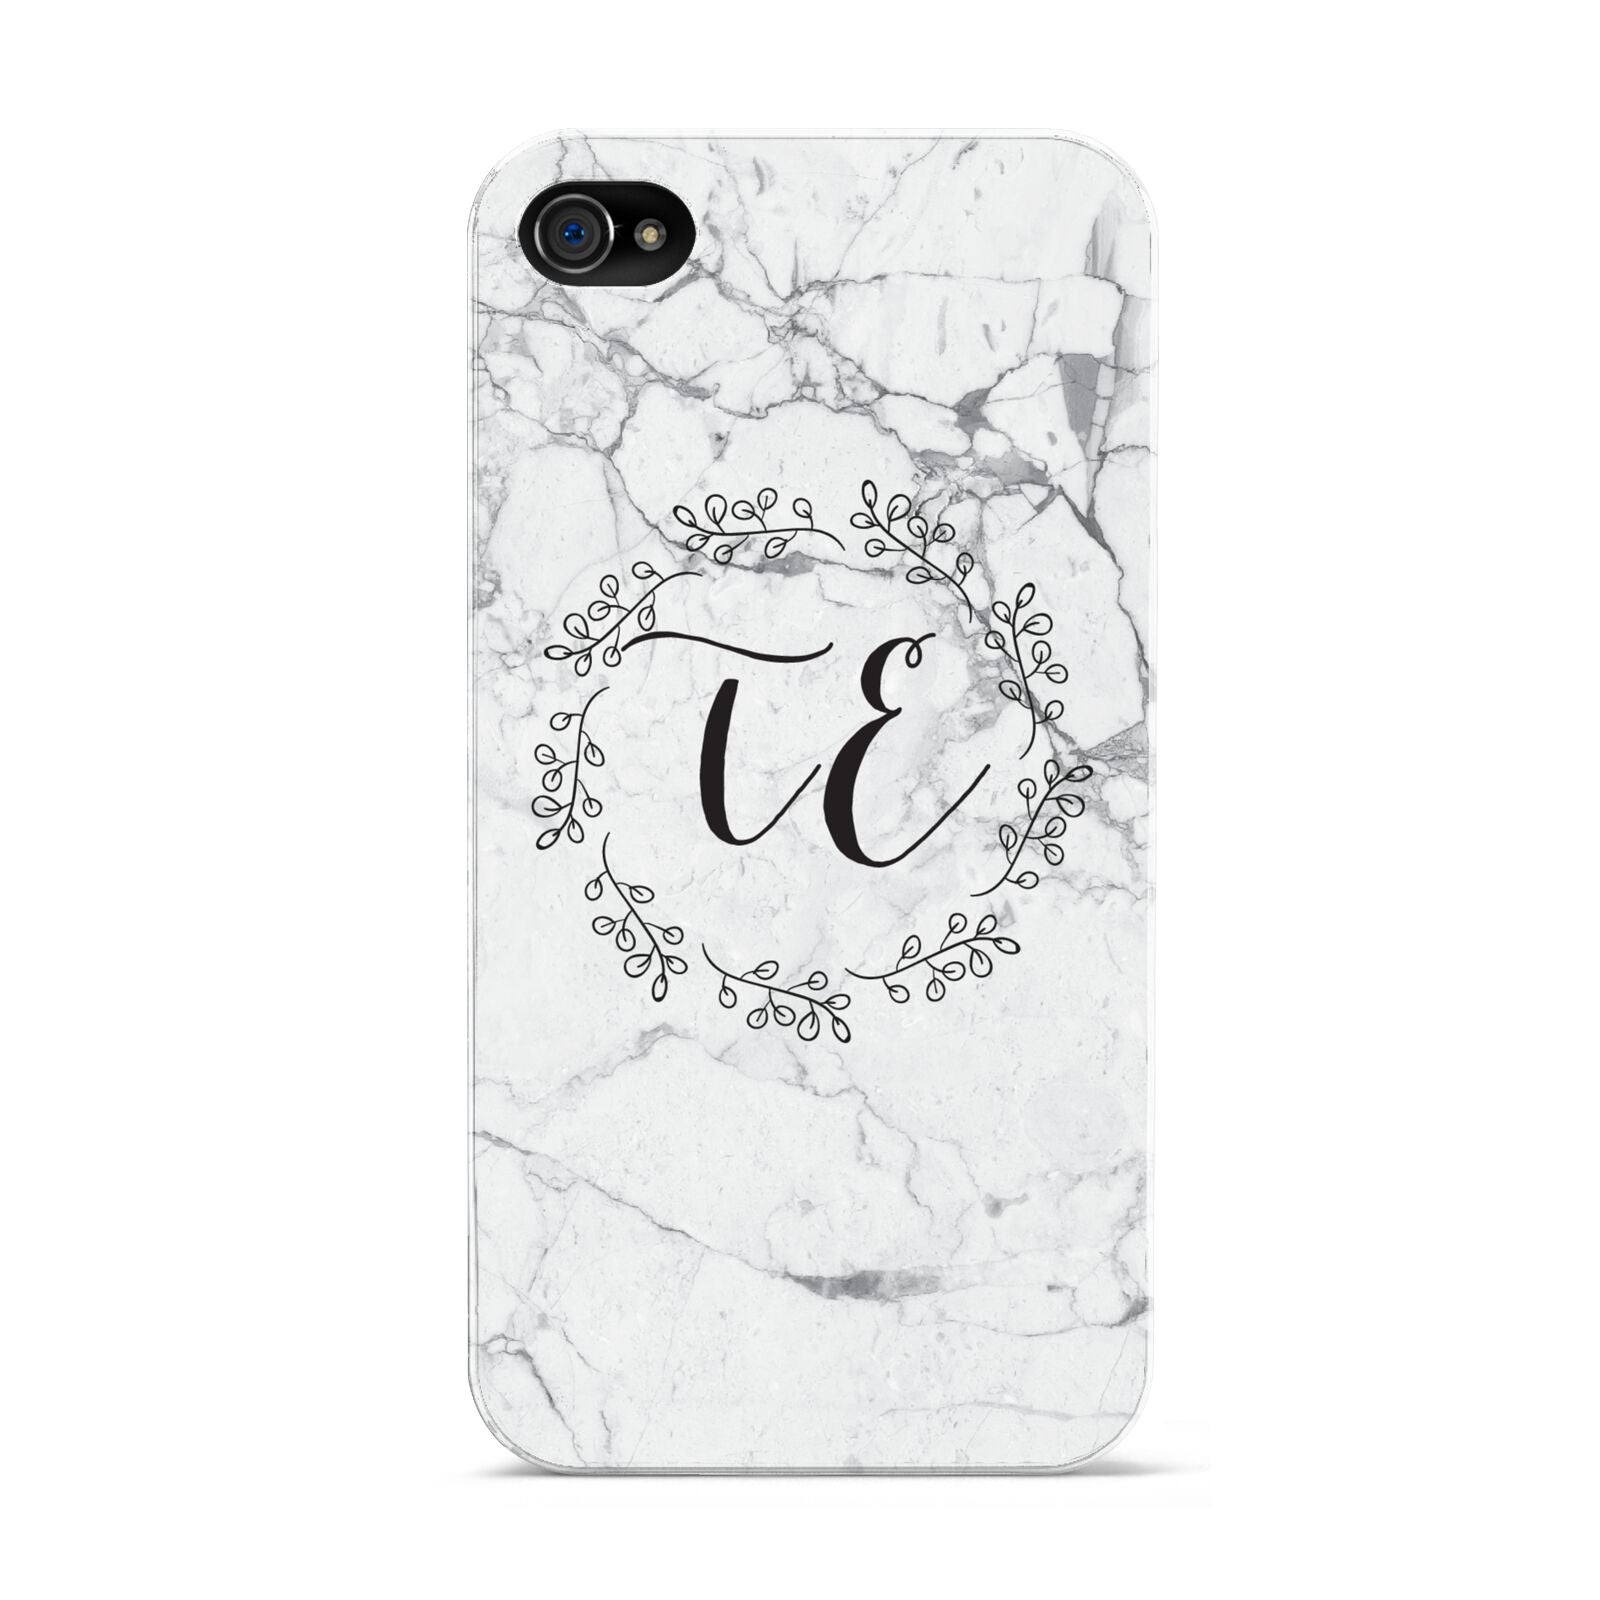 Personalised Initials Marble Apple iPhone 4s Case